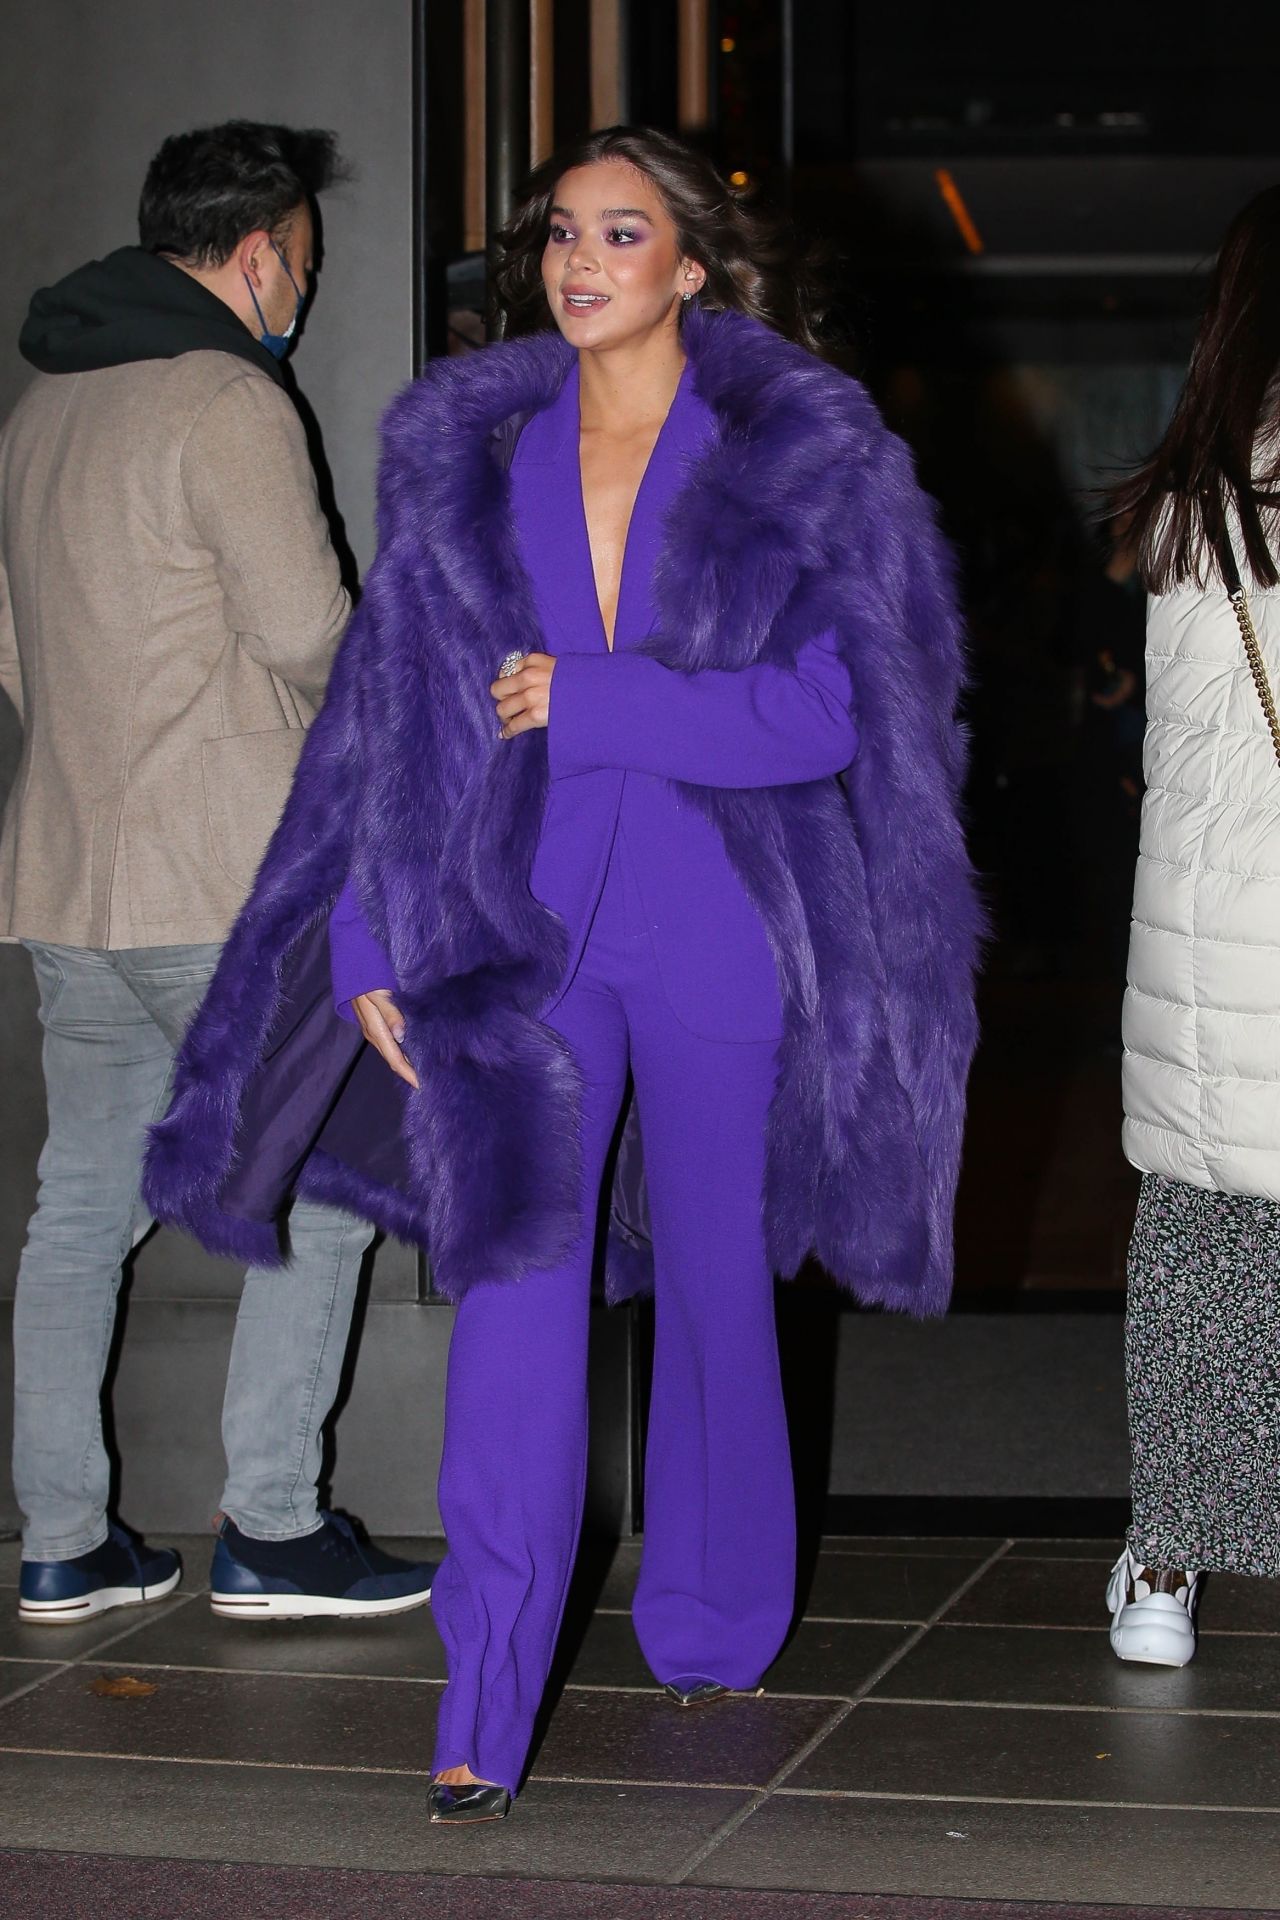 Hailee Steinfeld in a Purple Outfit - The Dominick Hotel in NYC 11/22 ...